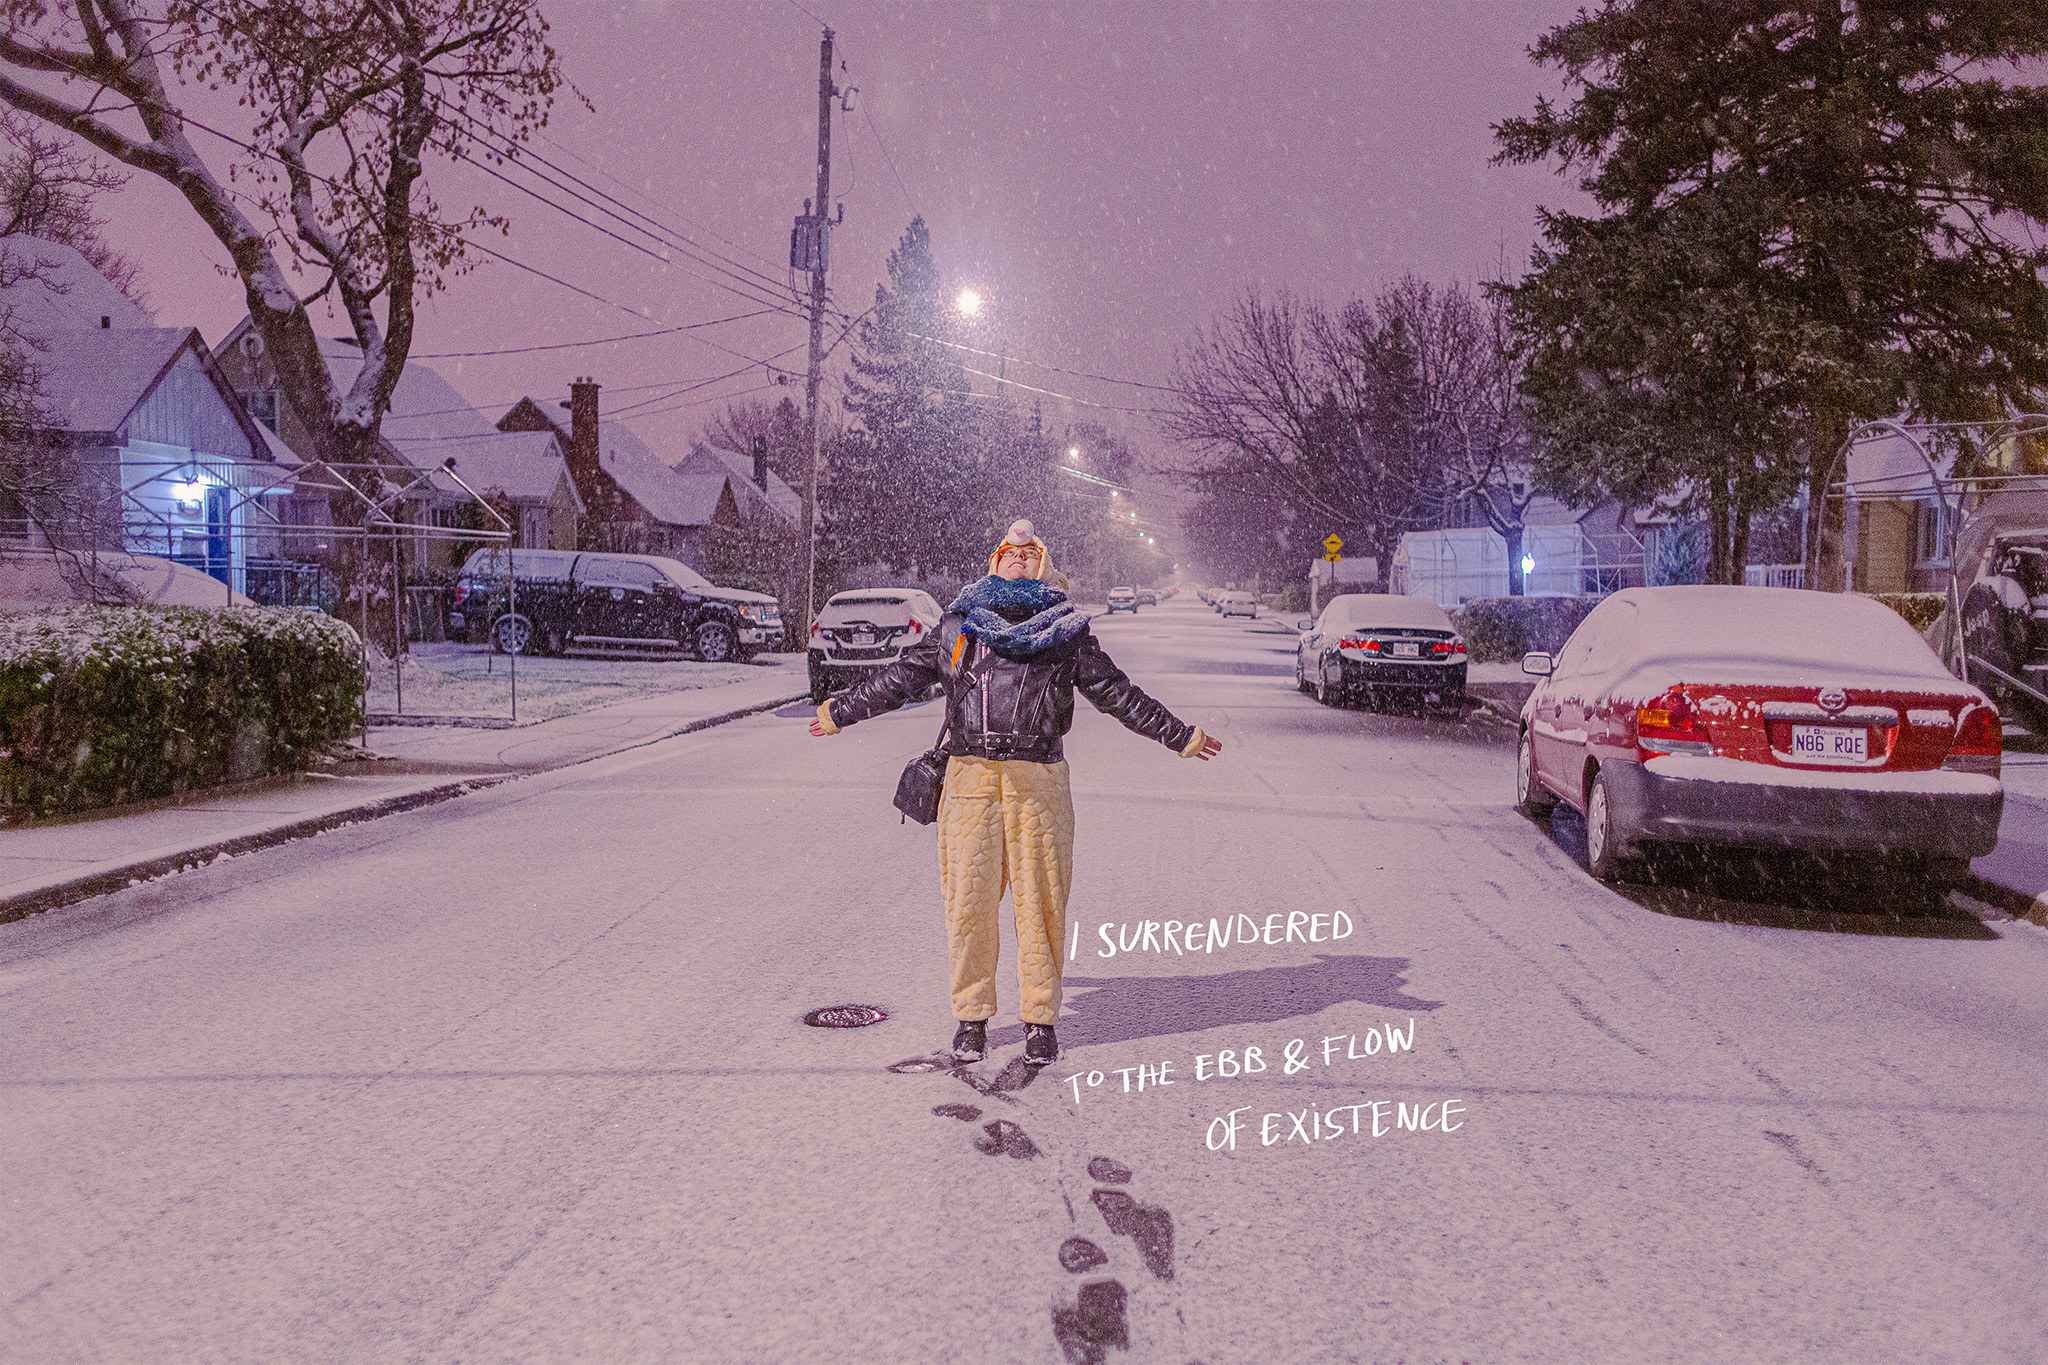 A person outside in the street in the snow with their arms wide with the text on the image reading, &quot;I surrendered to the ebb and flow of existence&quot;